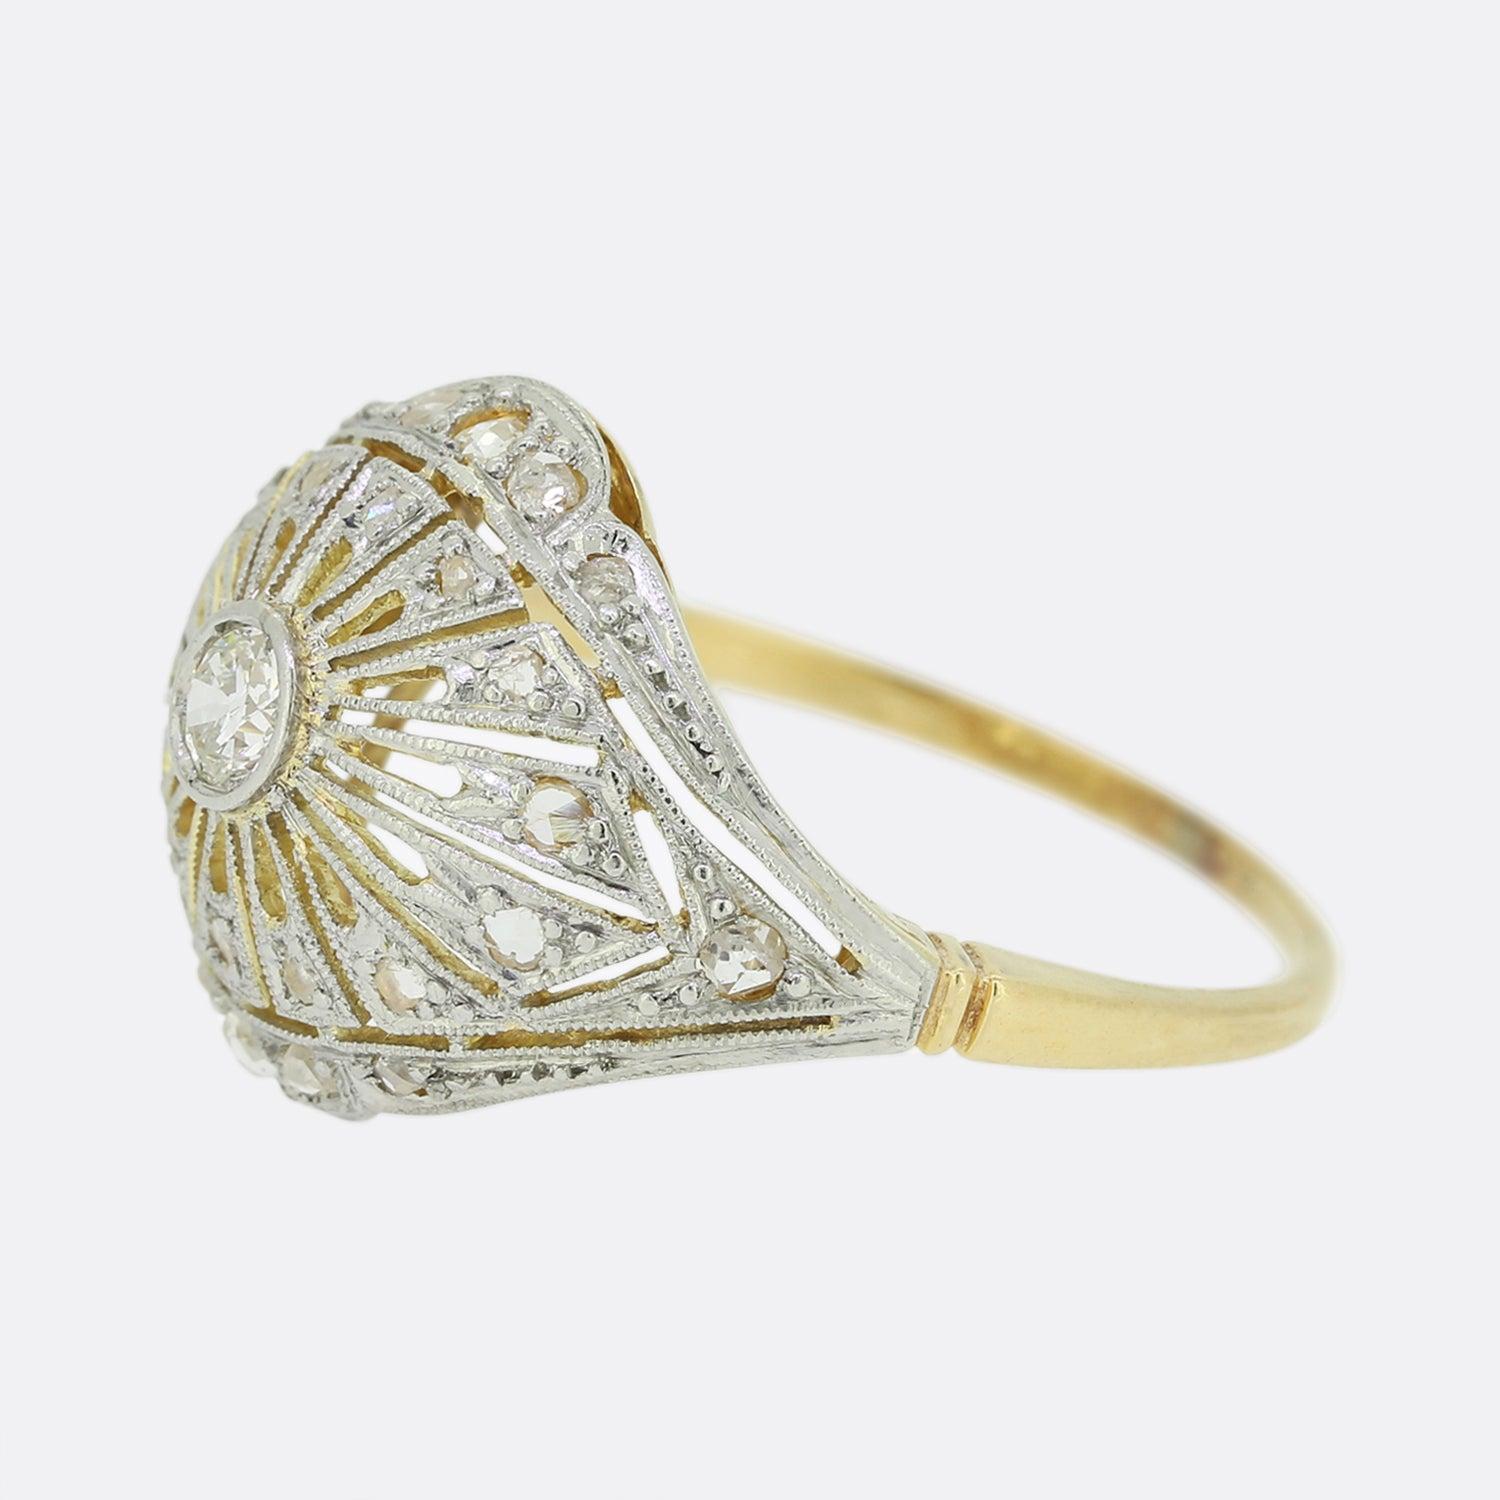 This is a wonderful diamond bombe ring from the Art Deco era. The ring features a central old cut diamond which is surrounded by a halo of rose cut diamonds in a bombe style setting crafted in platinum with an 18ct yellow gold band. 

Condition: